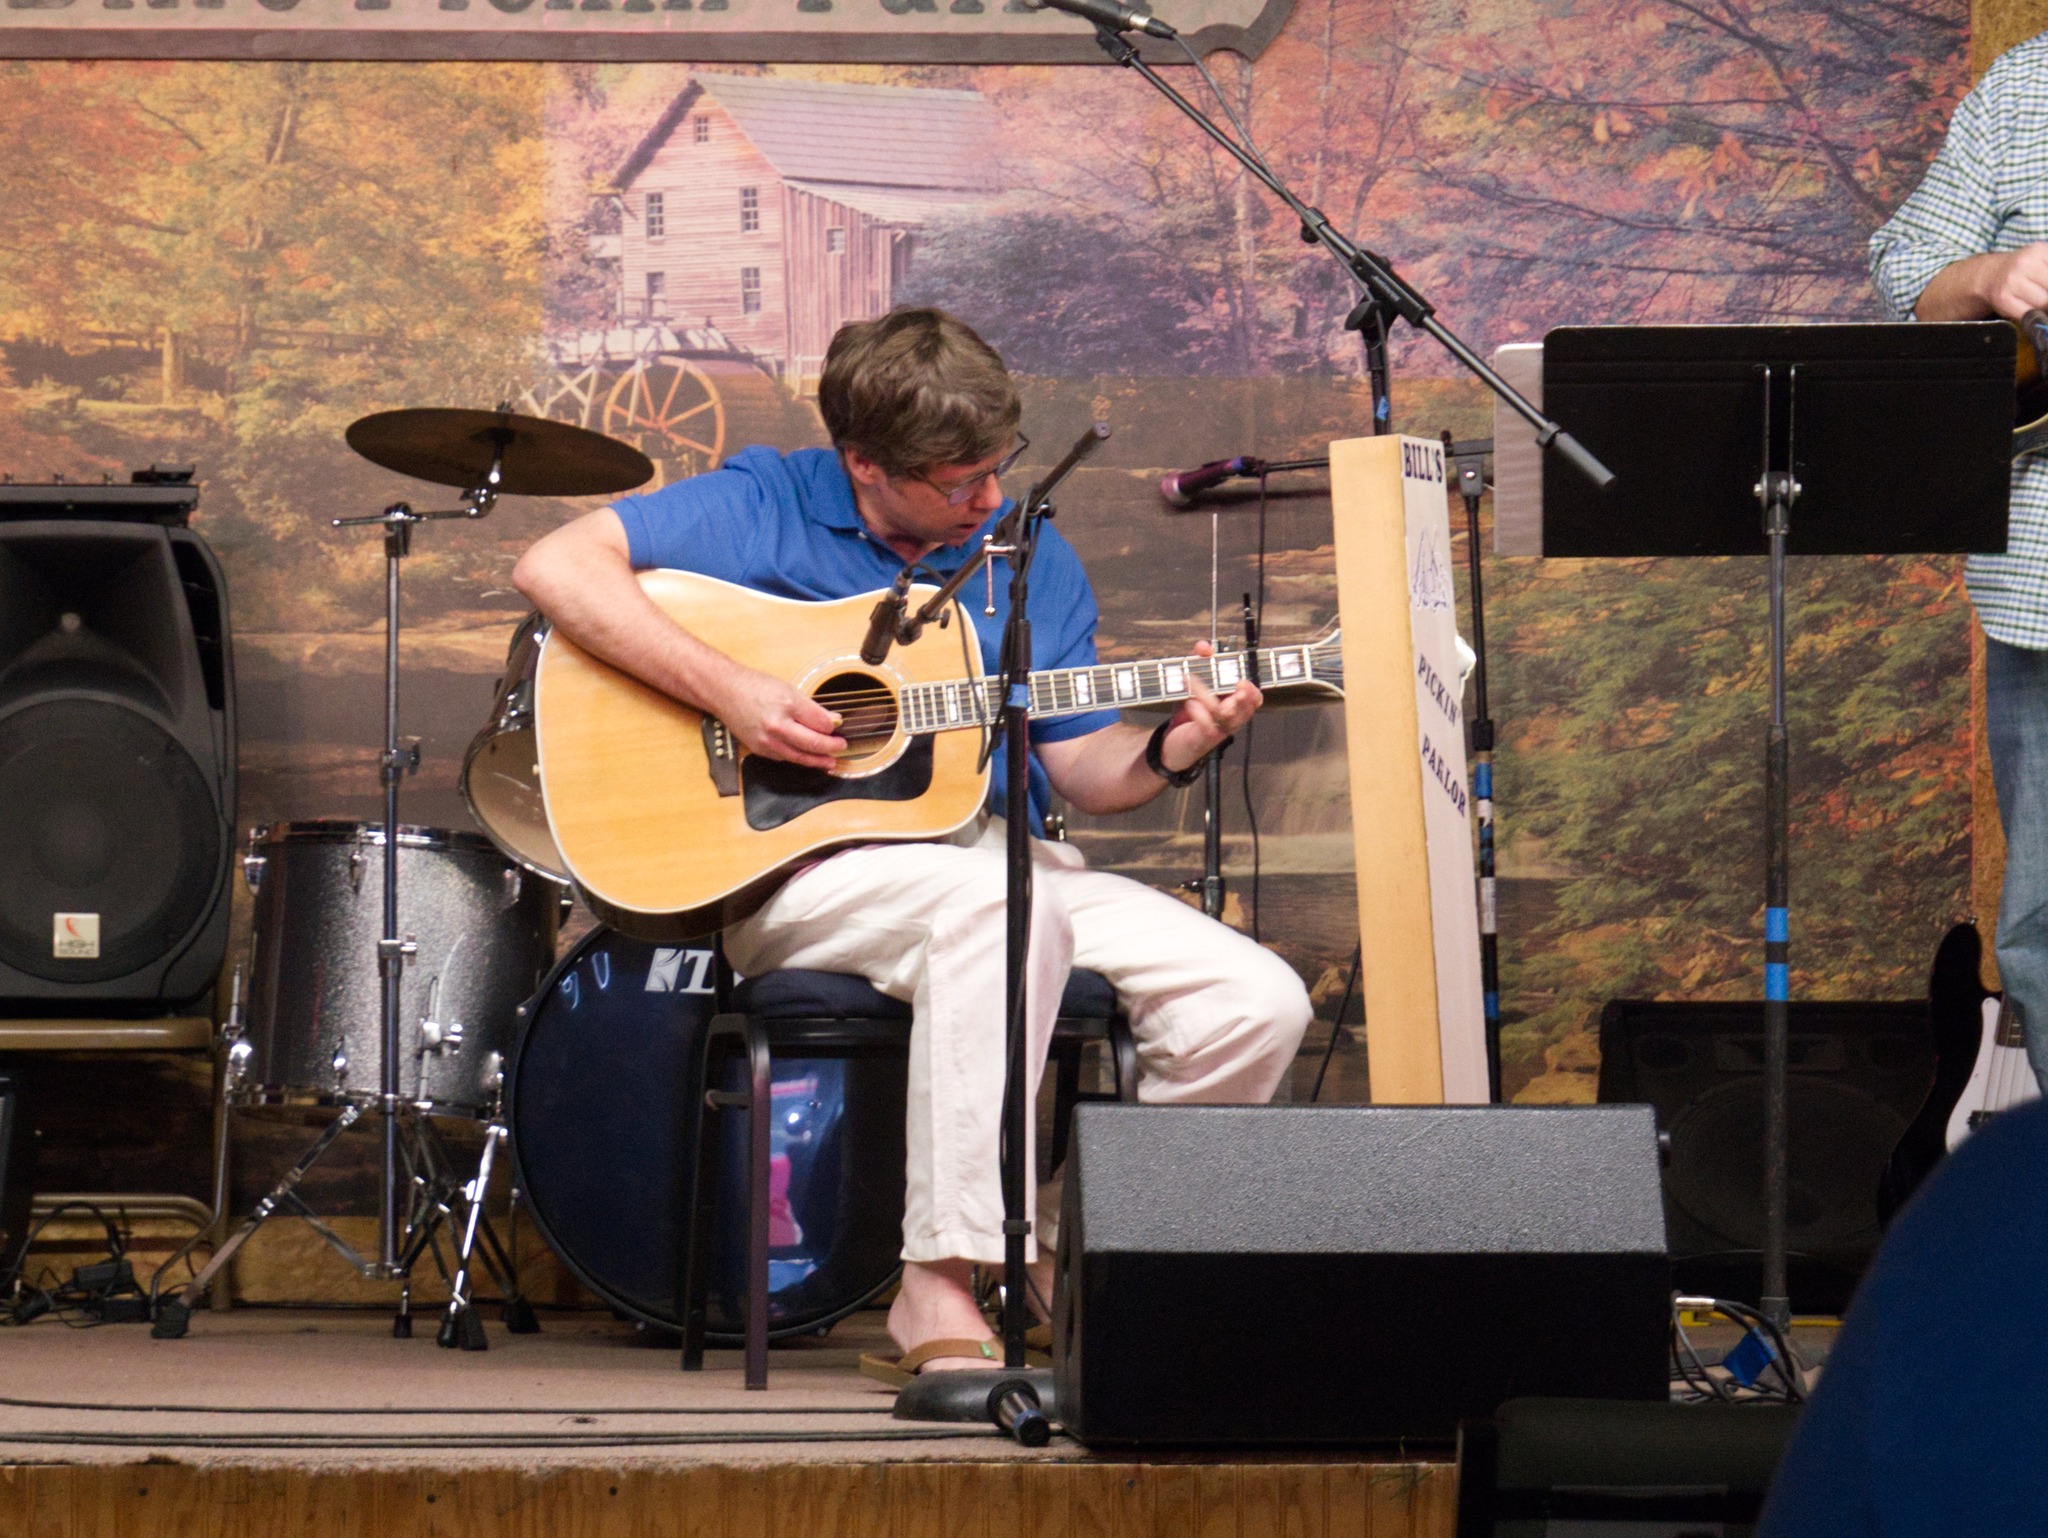 Jim performing with a guitar student